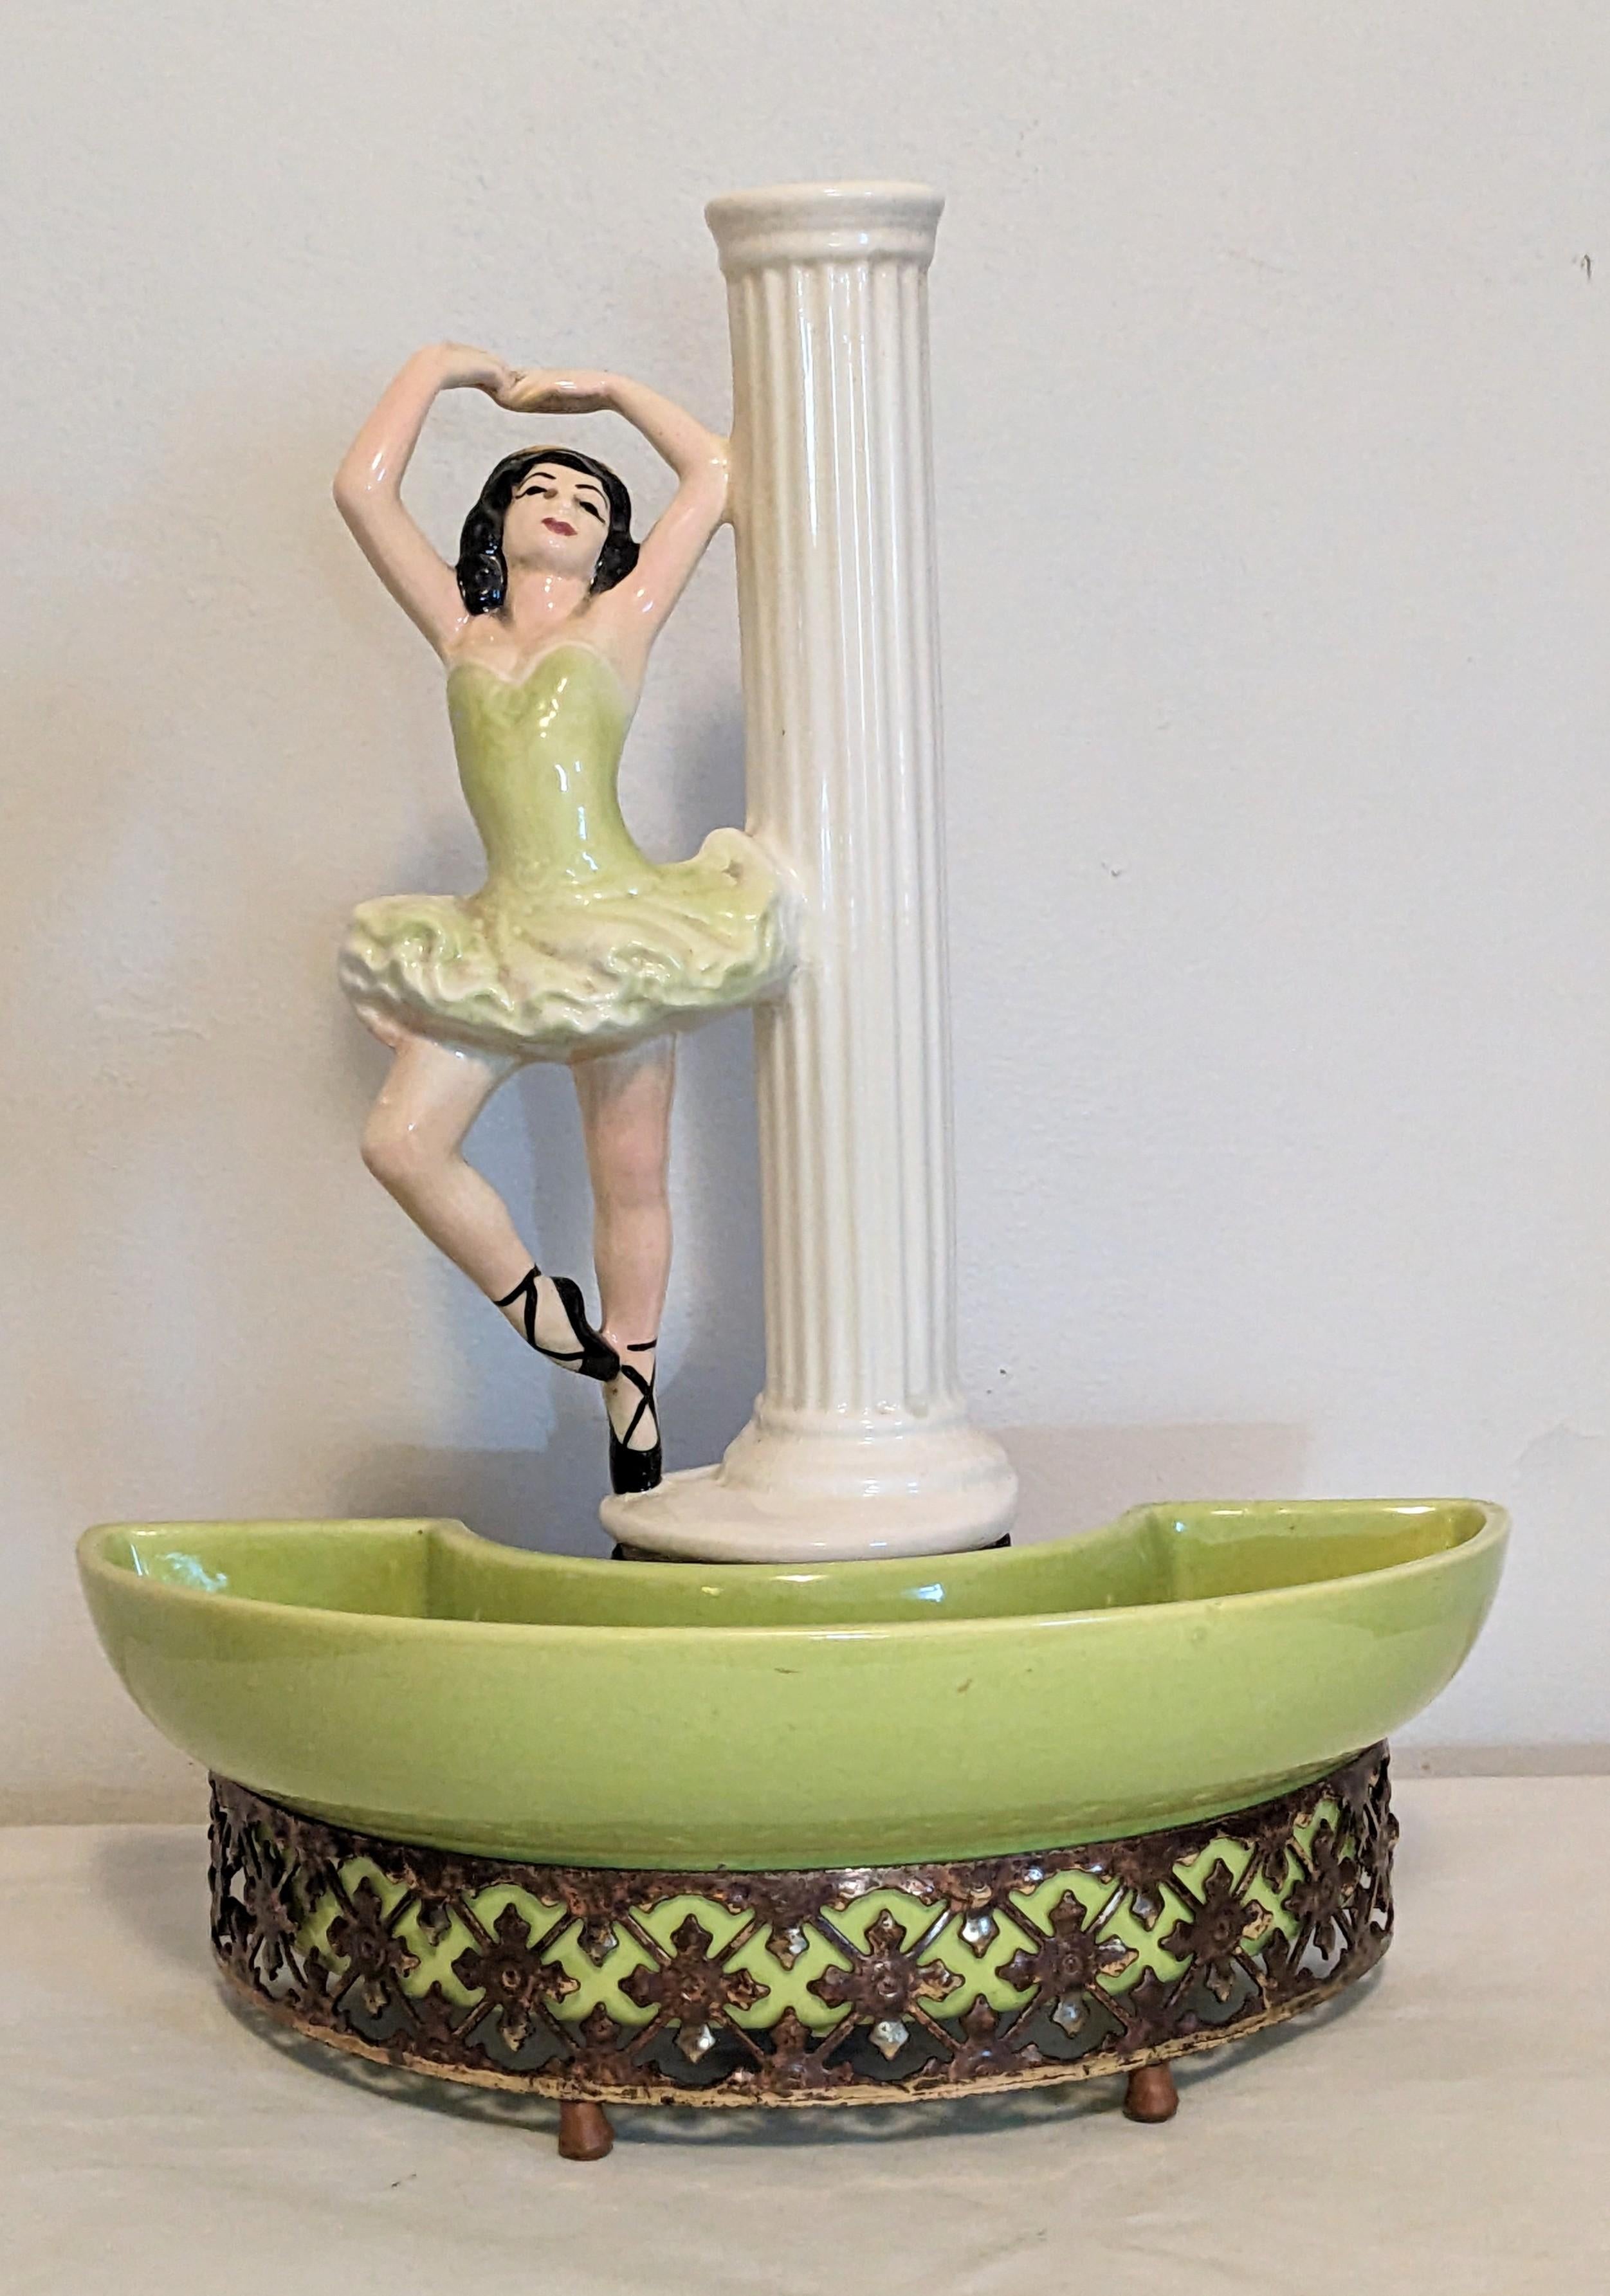 California Pottery Ballerina TV lamp from the 1950's by the Sierra Columbia Pottery Company of Pasadena. Glazed pottery ballerina sits atop a lime pottery planter well which is back lit by a small bulb. 
Kitsch and amusing 1950's decor.
 